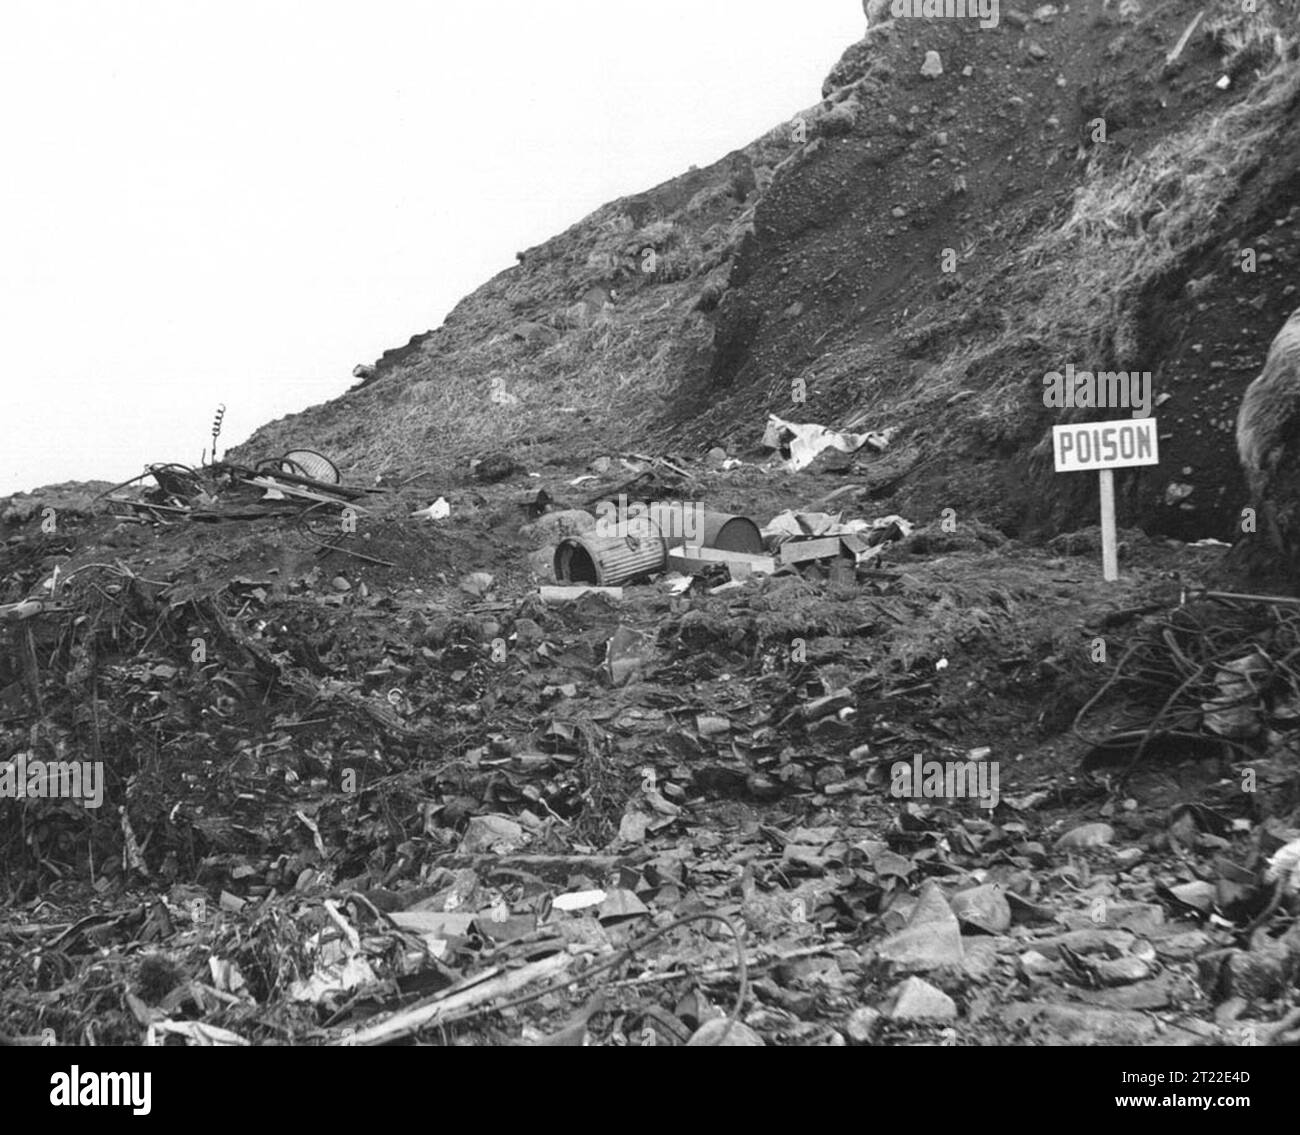 Consolidated Army, Navy, Air Force dump, Amchitka Island, Aleutians, Rat Harbor location shows one of the aftermaths of war includign the introduction of rats introduced on a hitherto uninfested island. The dump attracts rats. Note: Sign 'Poison'. Subjects: History; Wildlife refuges; Pollution; Military. Location: Alaska. Fish and Wildlife Service Site: Alaska Maritime National Wildlife Refuge. Stock Photo